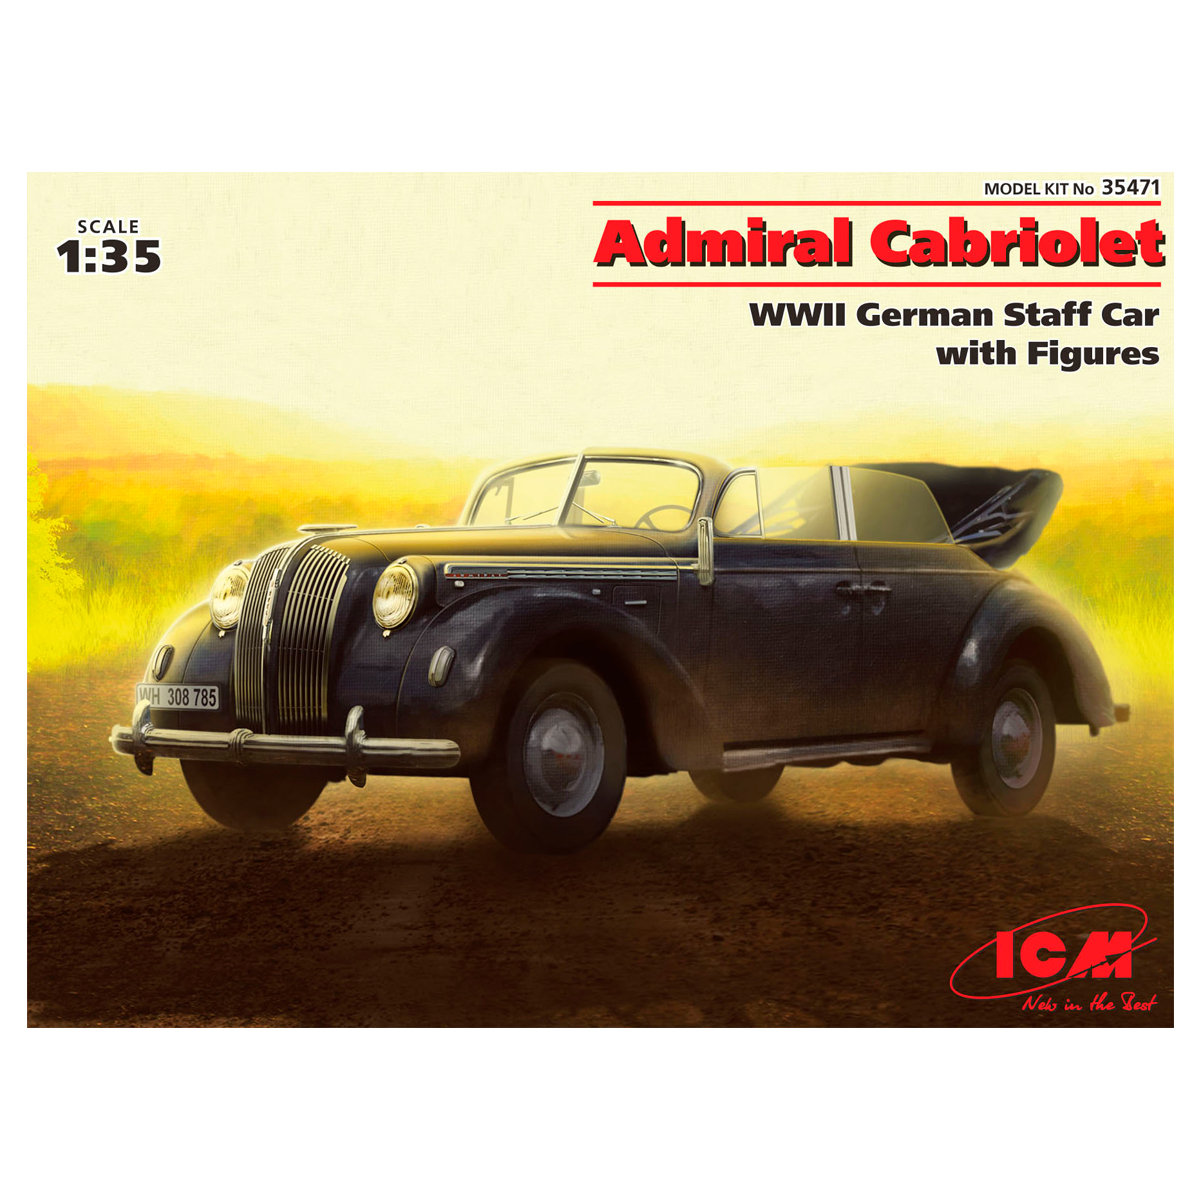 Admiral Cabriolet, WWII German Staff Car with Figures 1/35